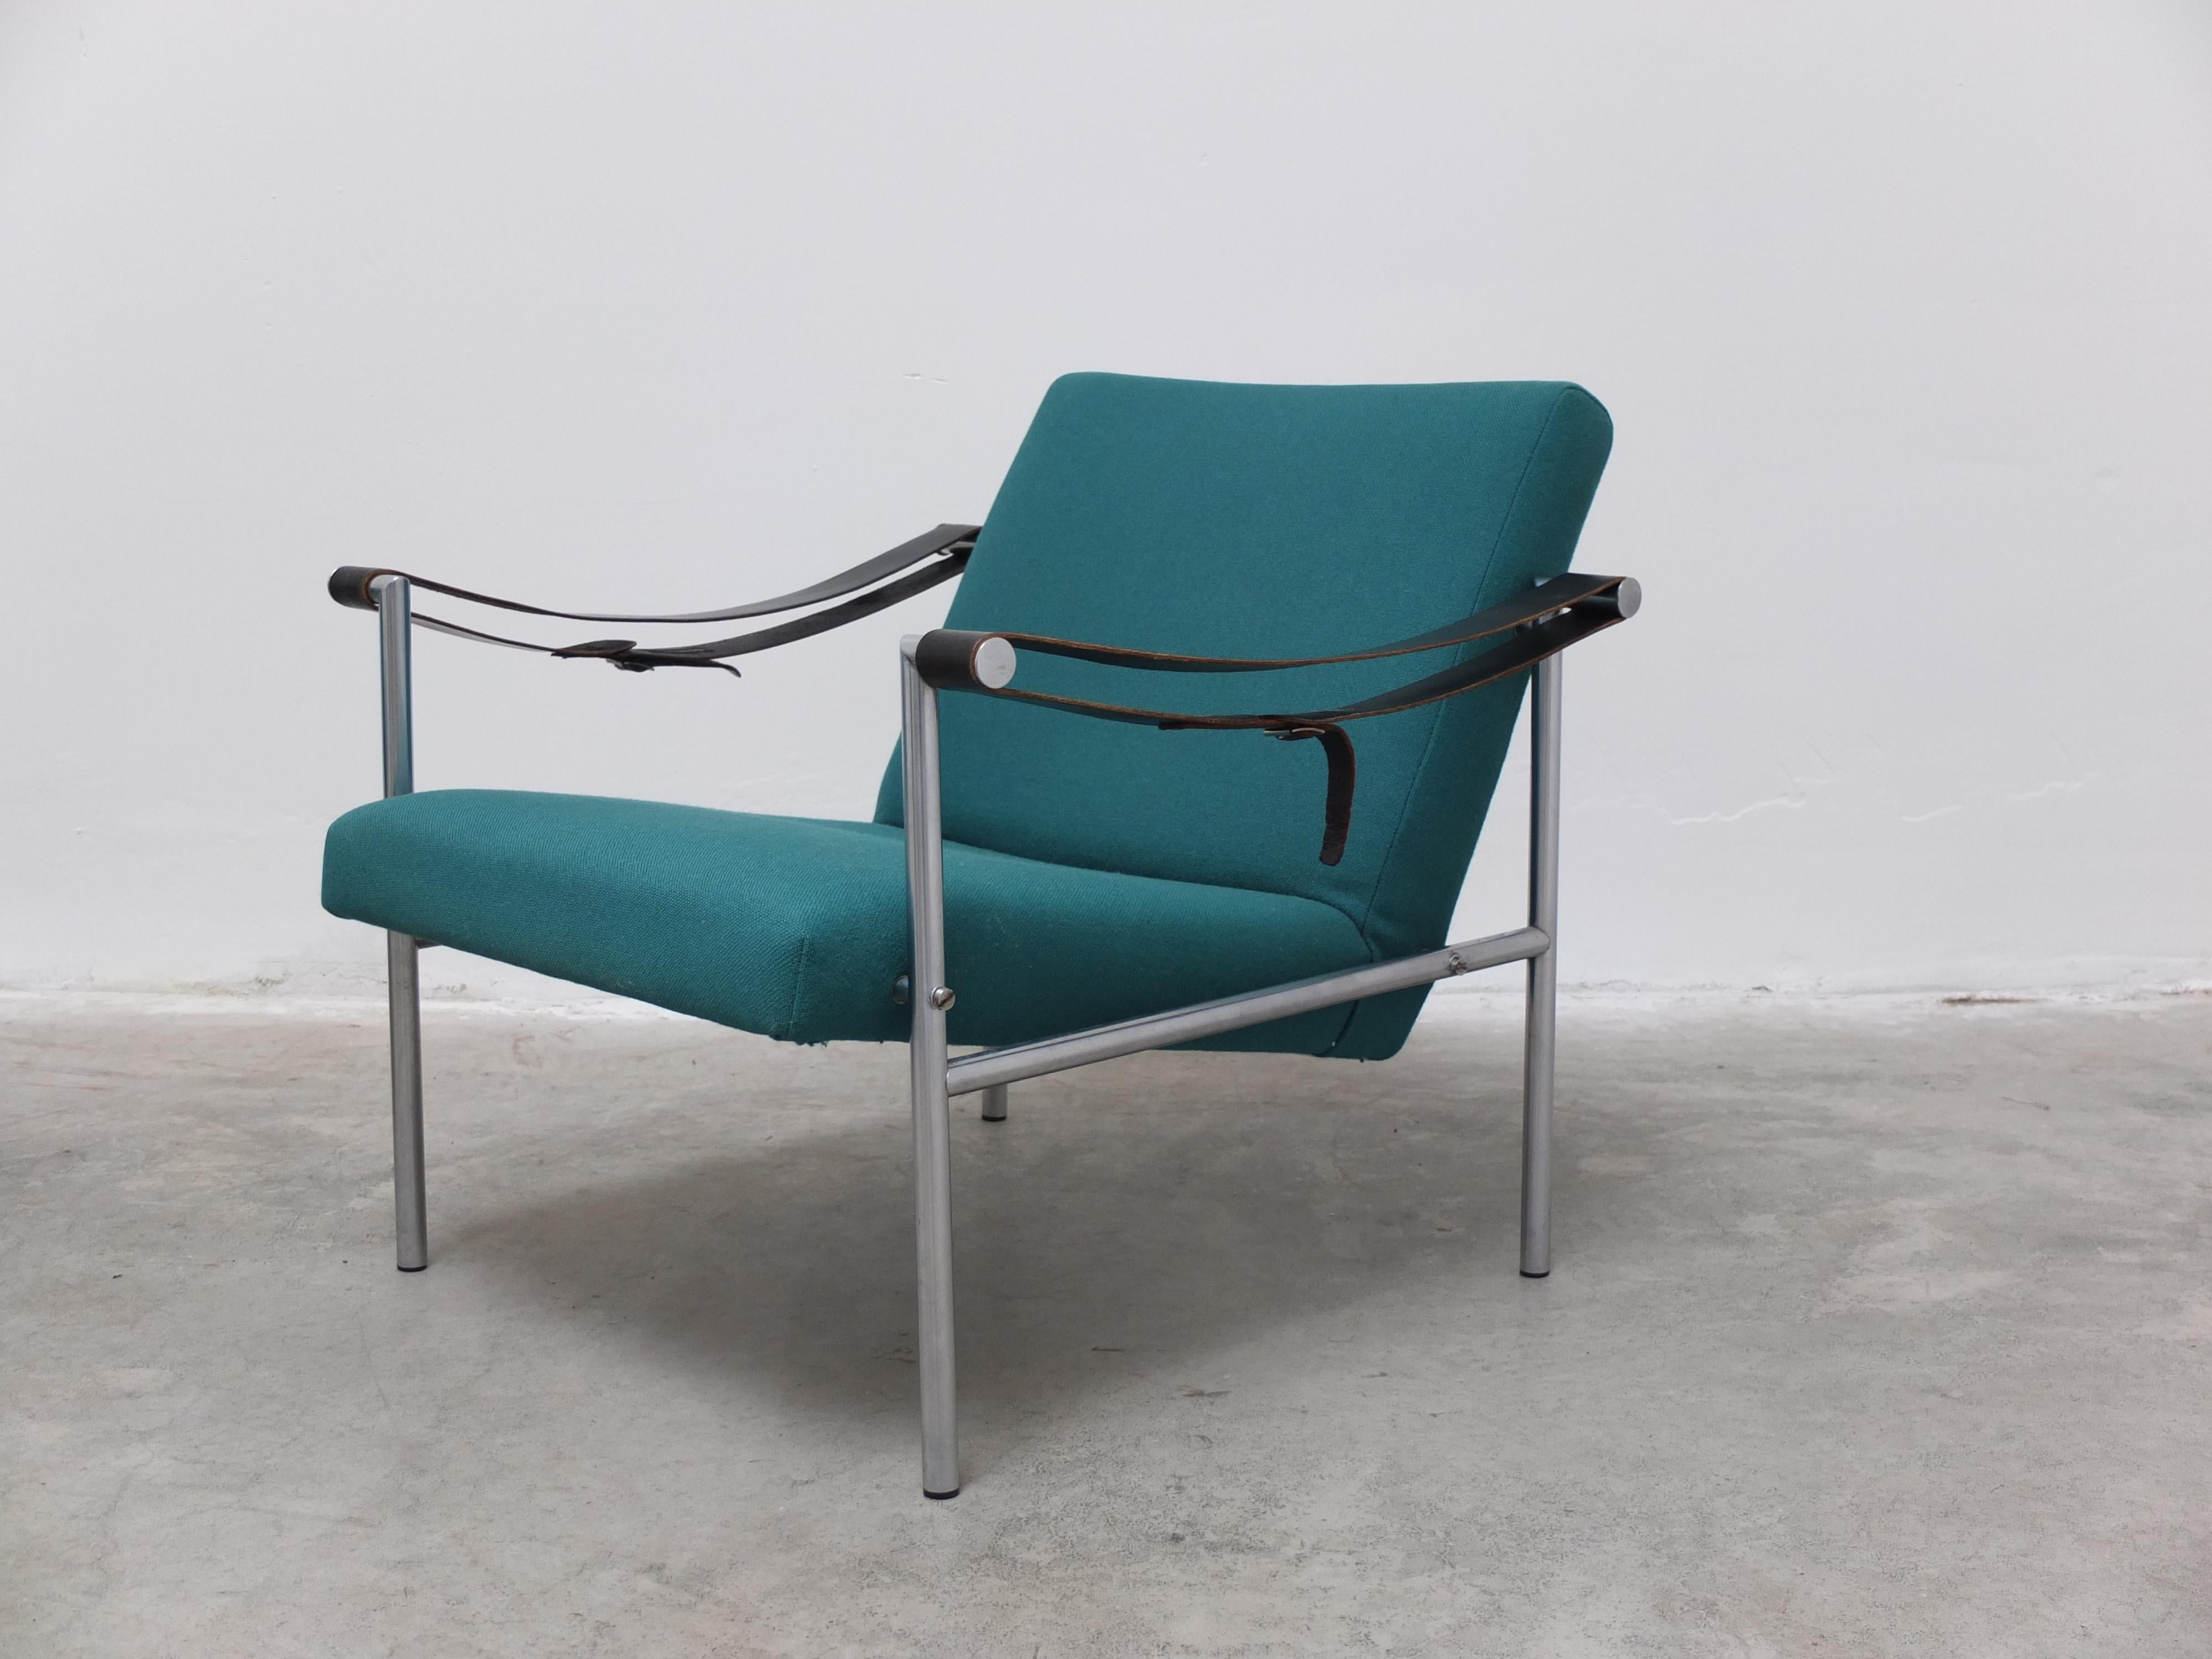 Pair of 'SZ08' Lounge Chairs by Martin Visser for 't Spectrum, 1960 For Sale 6